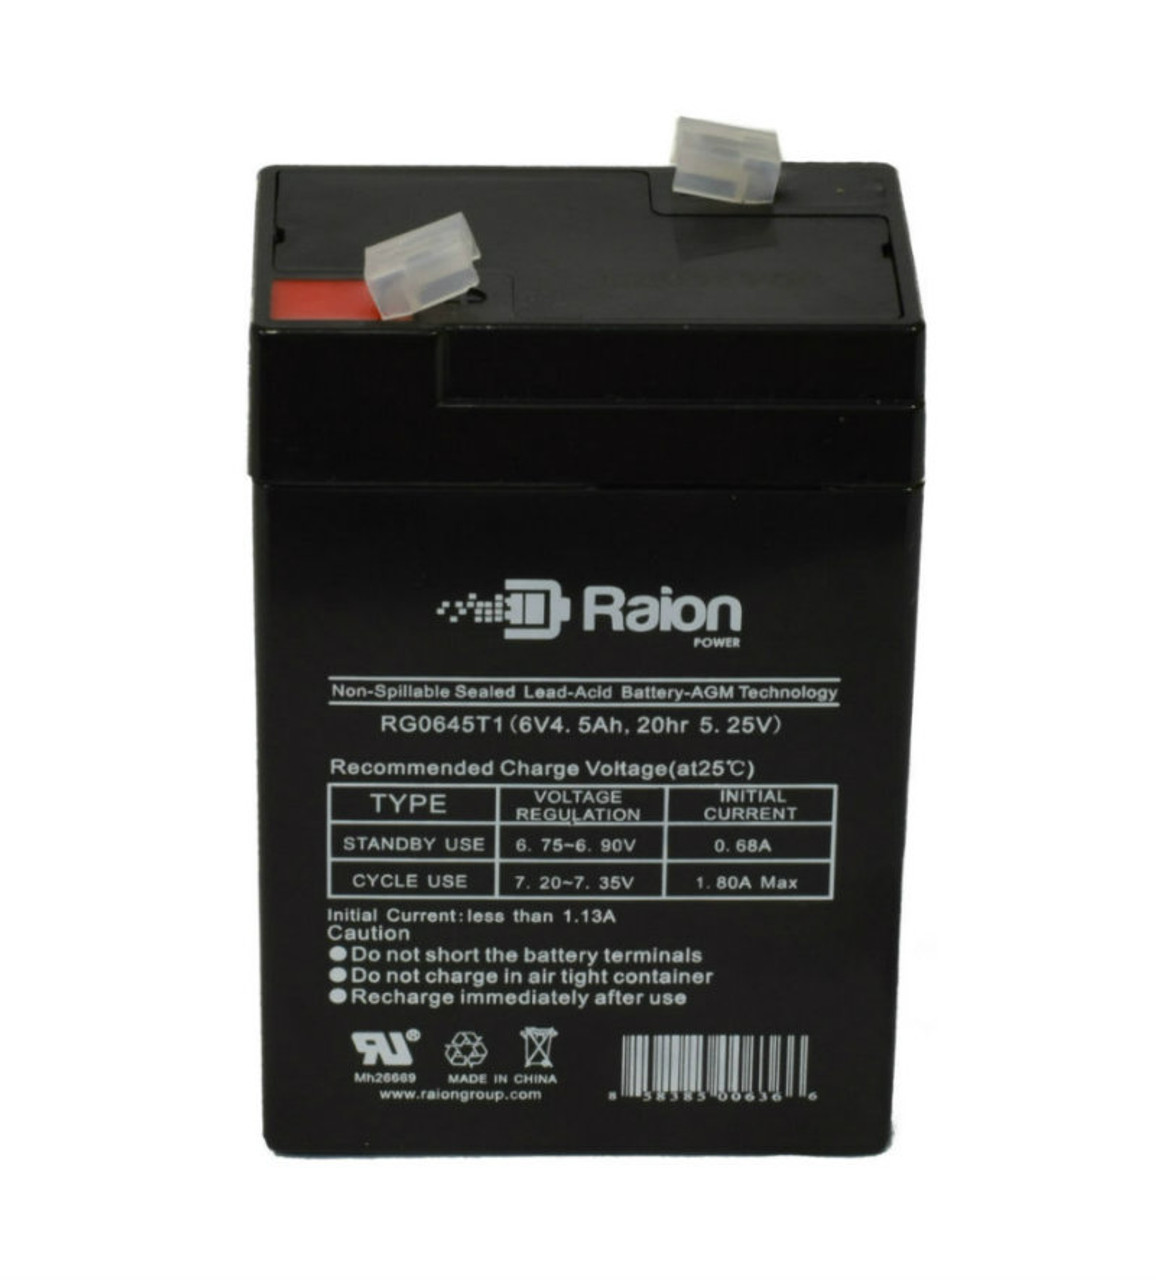 Raion Power RG0645T1 Replacement Battery Cartridge for Criticare Systems 506 Pulse Oximeter